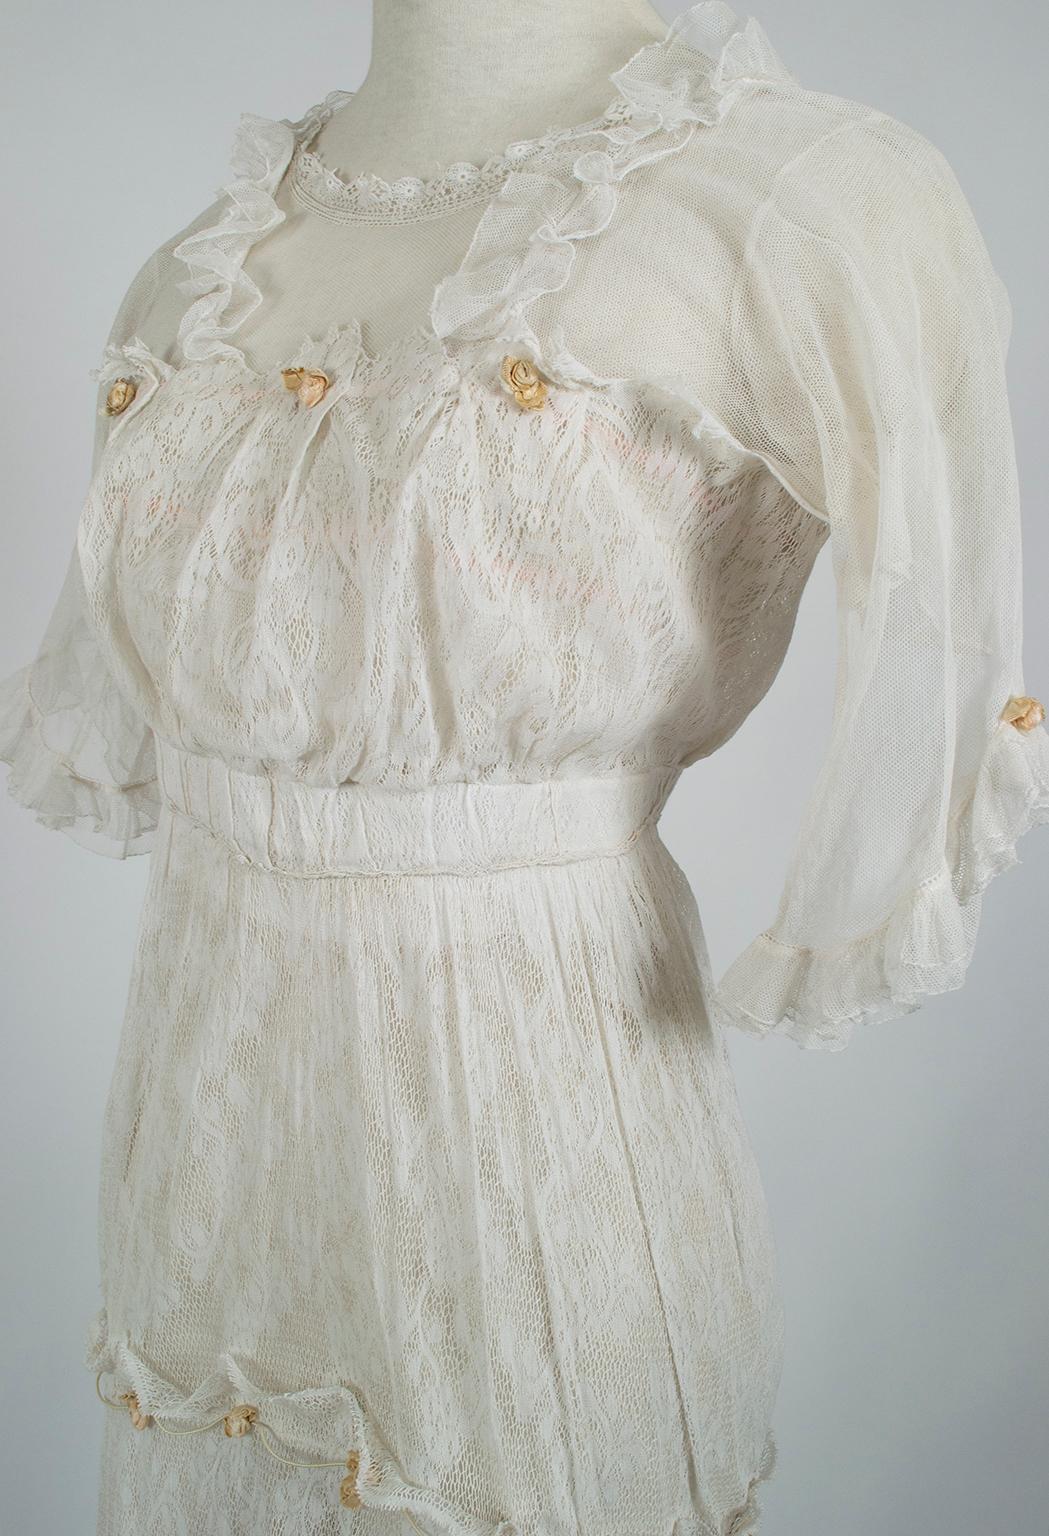 Gray White Edwardian Net Rosebud Afternoon Tea or Bridal Gown - XXS, Early 1900s For Sale